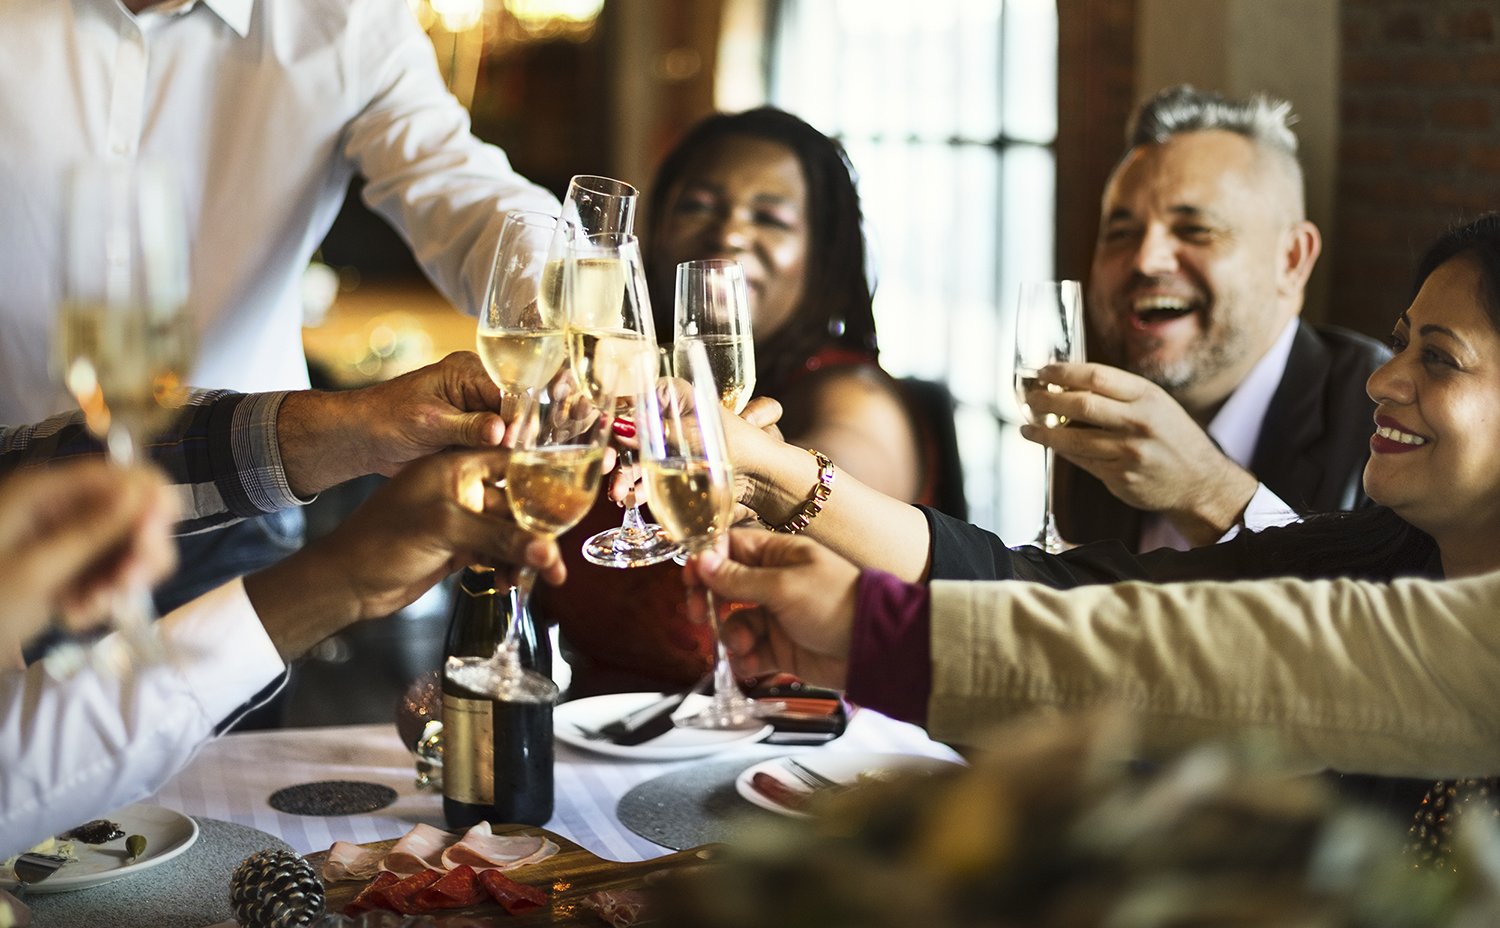 5 Tips for an Awesome Holiday Soiree (Pro Tips)